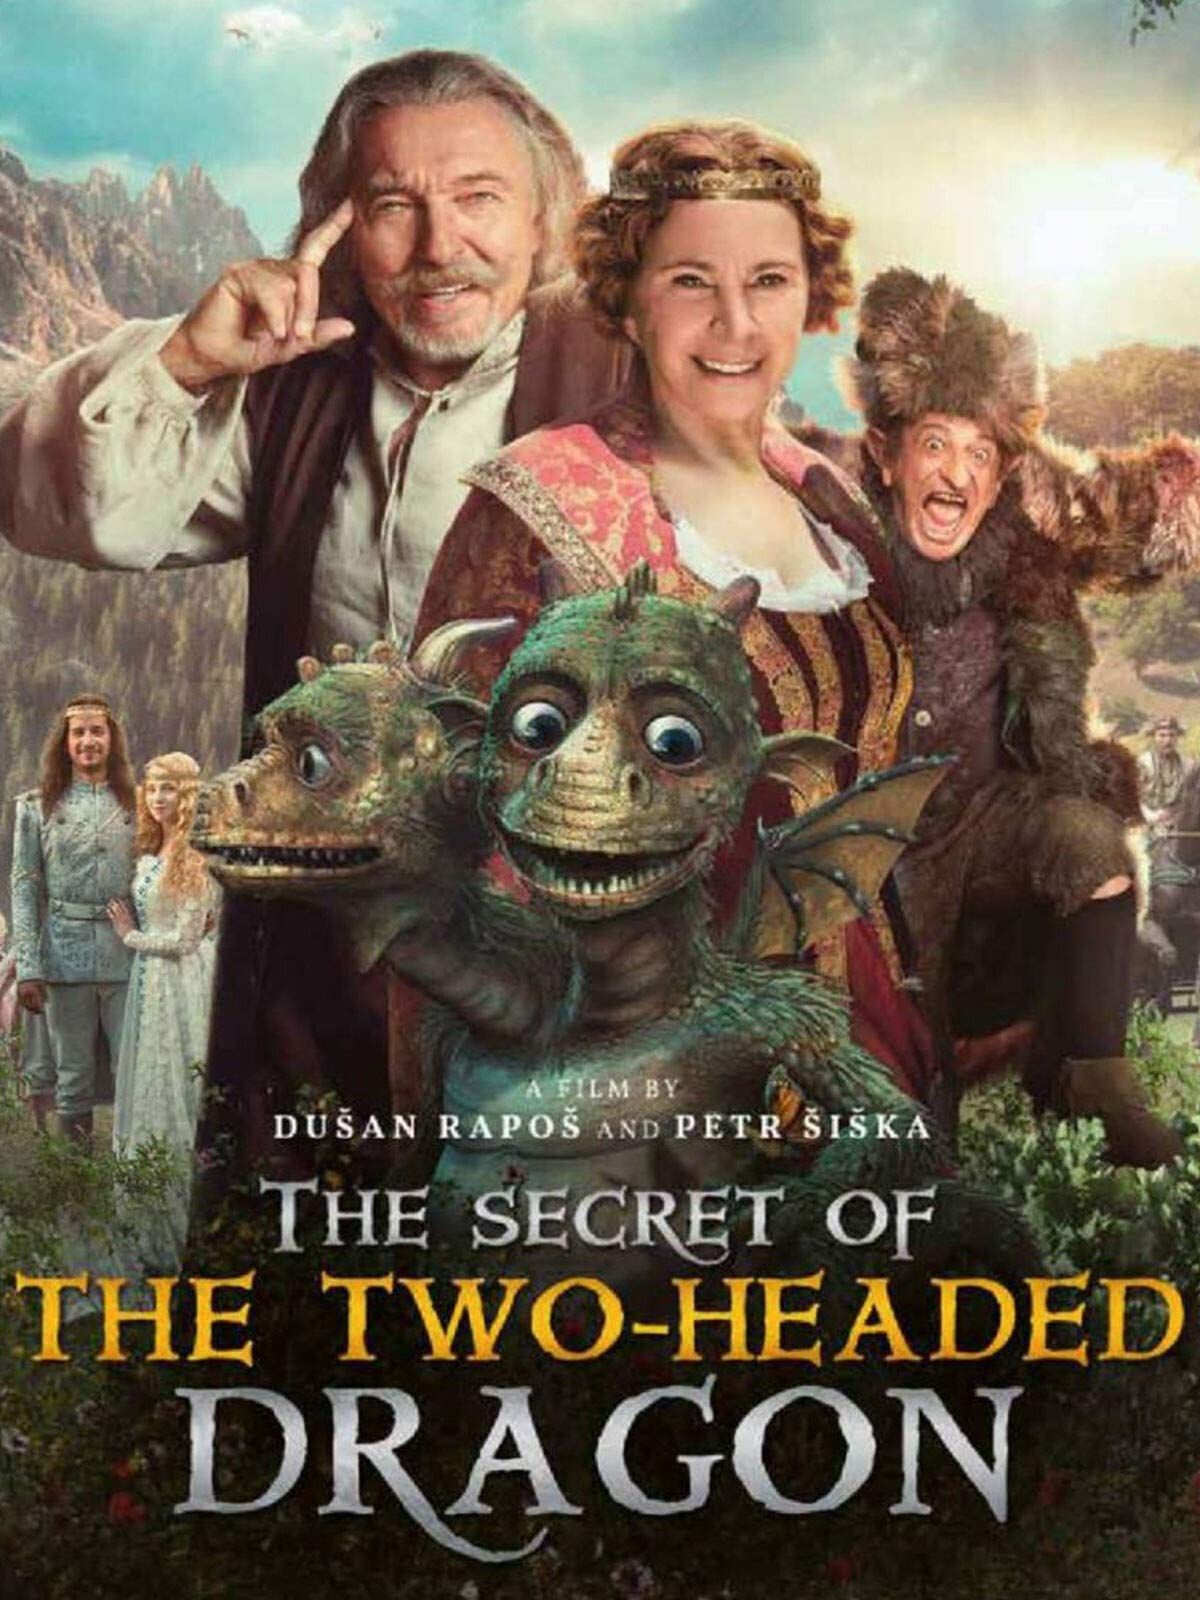 The Secret of the Two Headed Dragon (2018) Hindi Dubbed HDTV download full movie